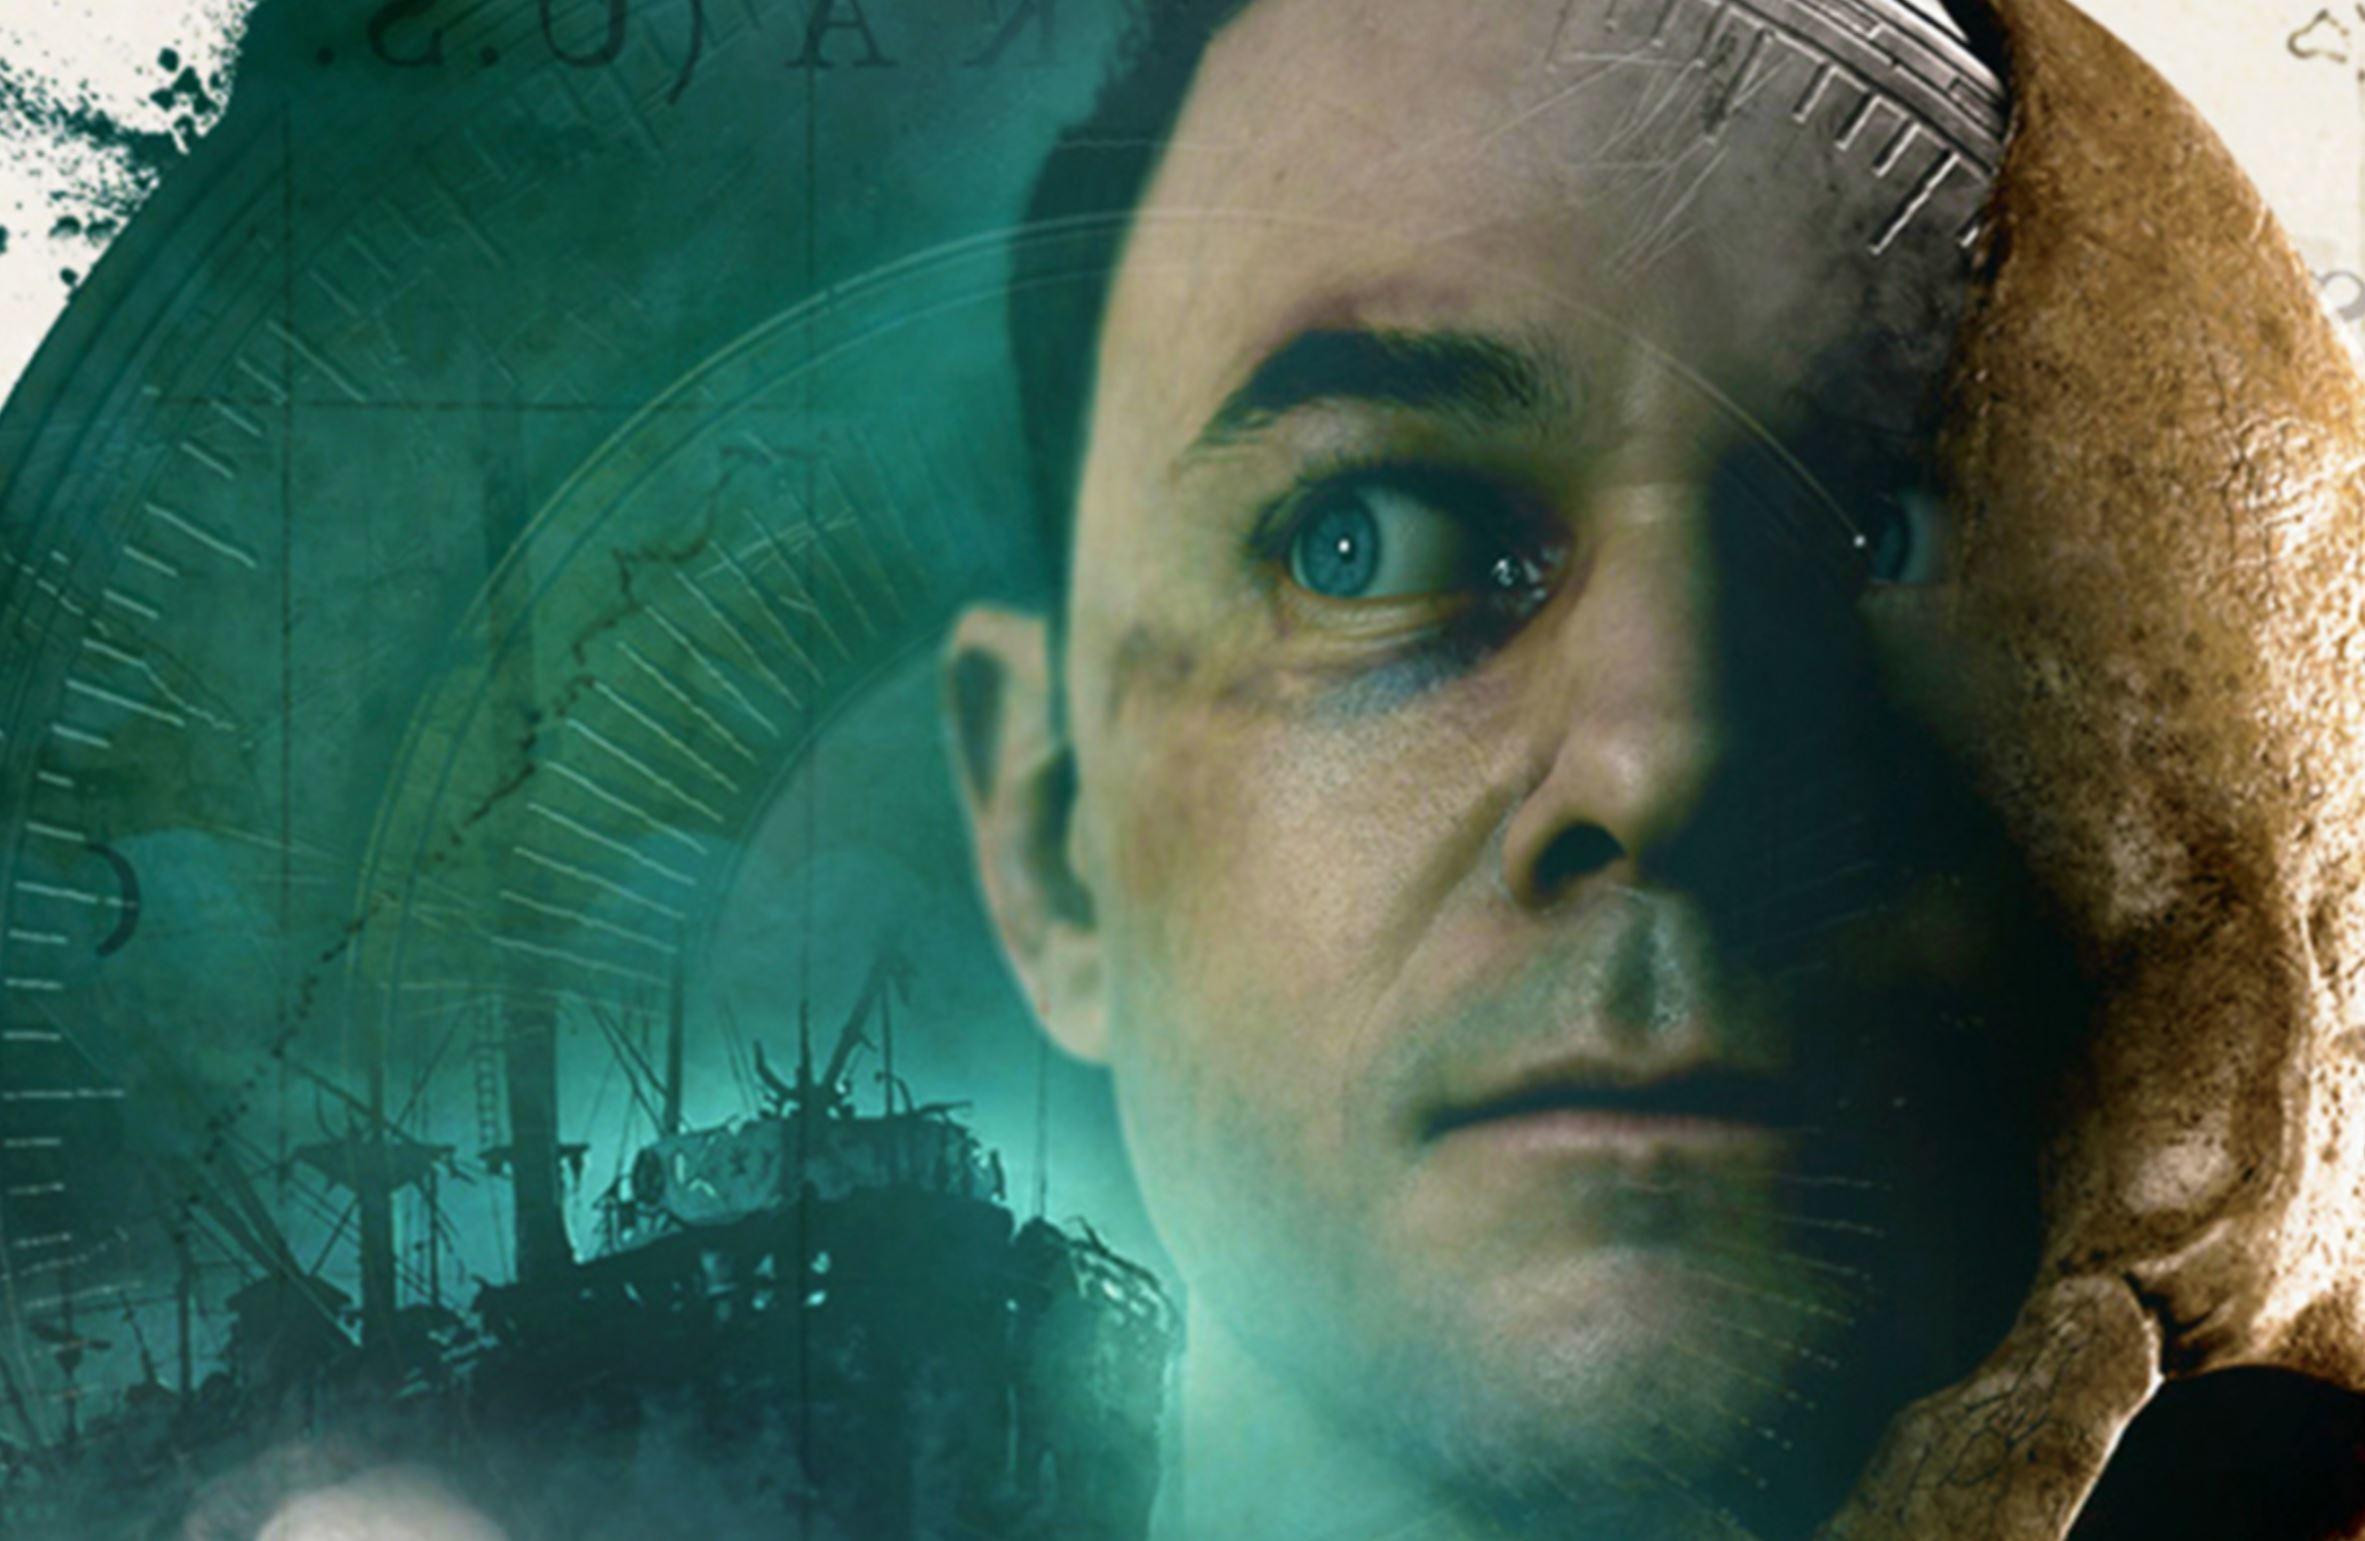 Man Of Medan Developers Discuss How Until Dawn Led To The New